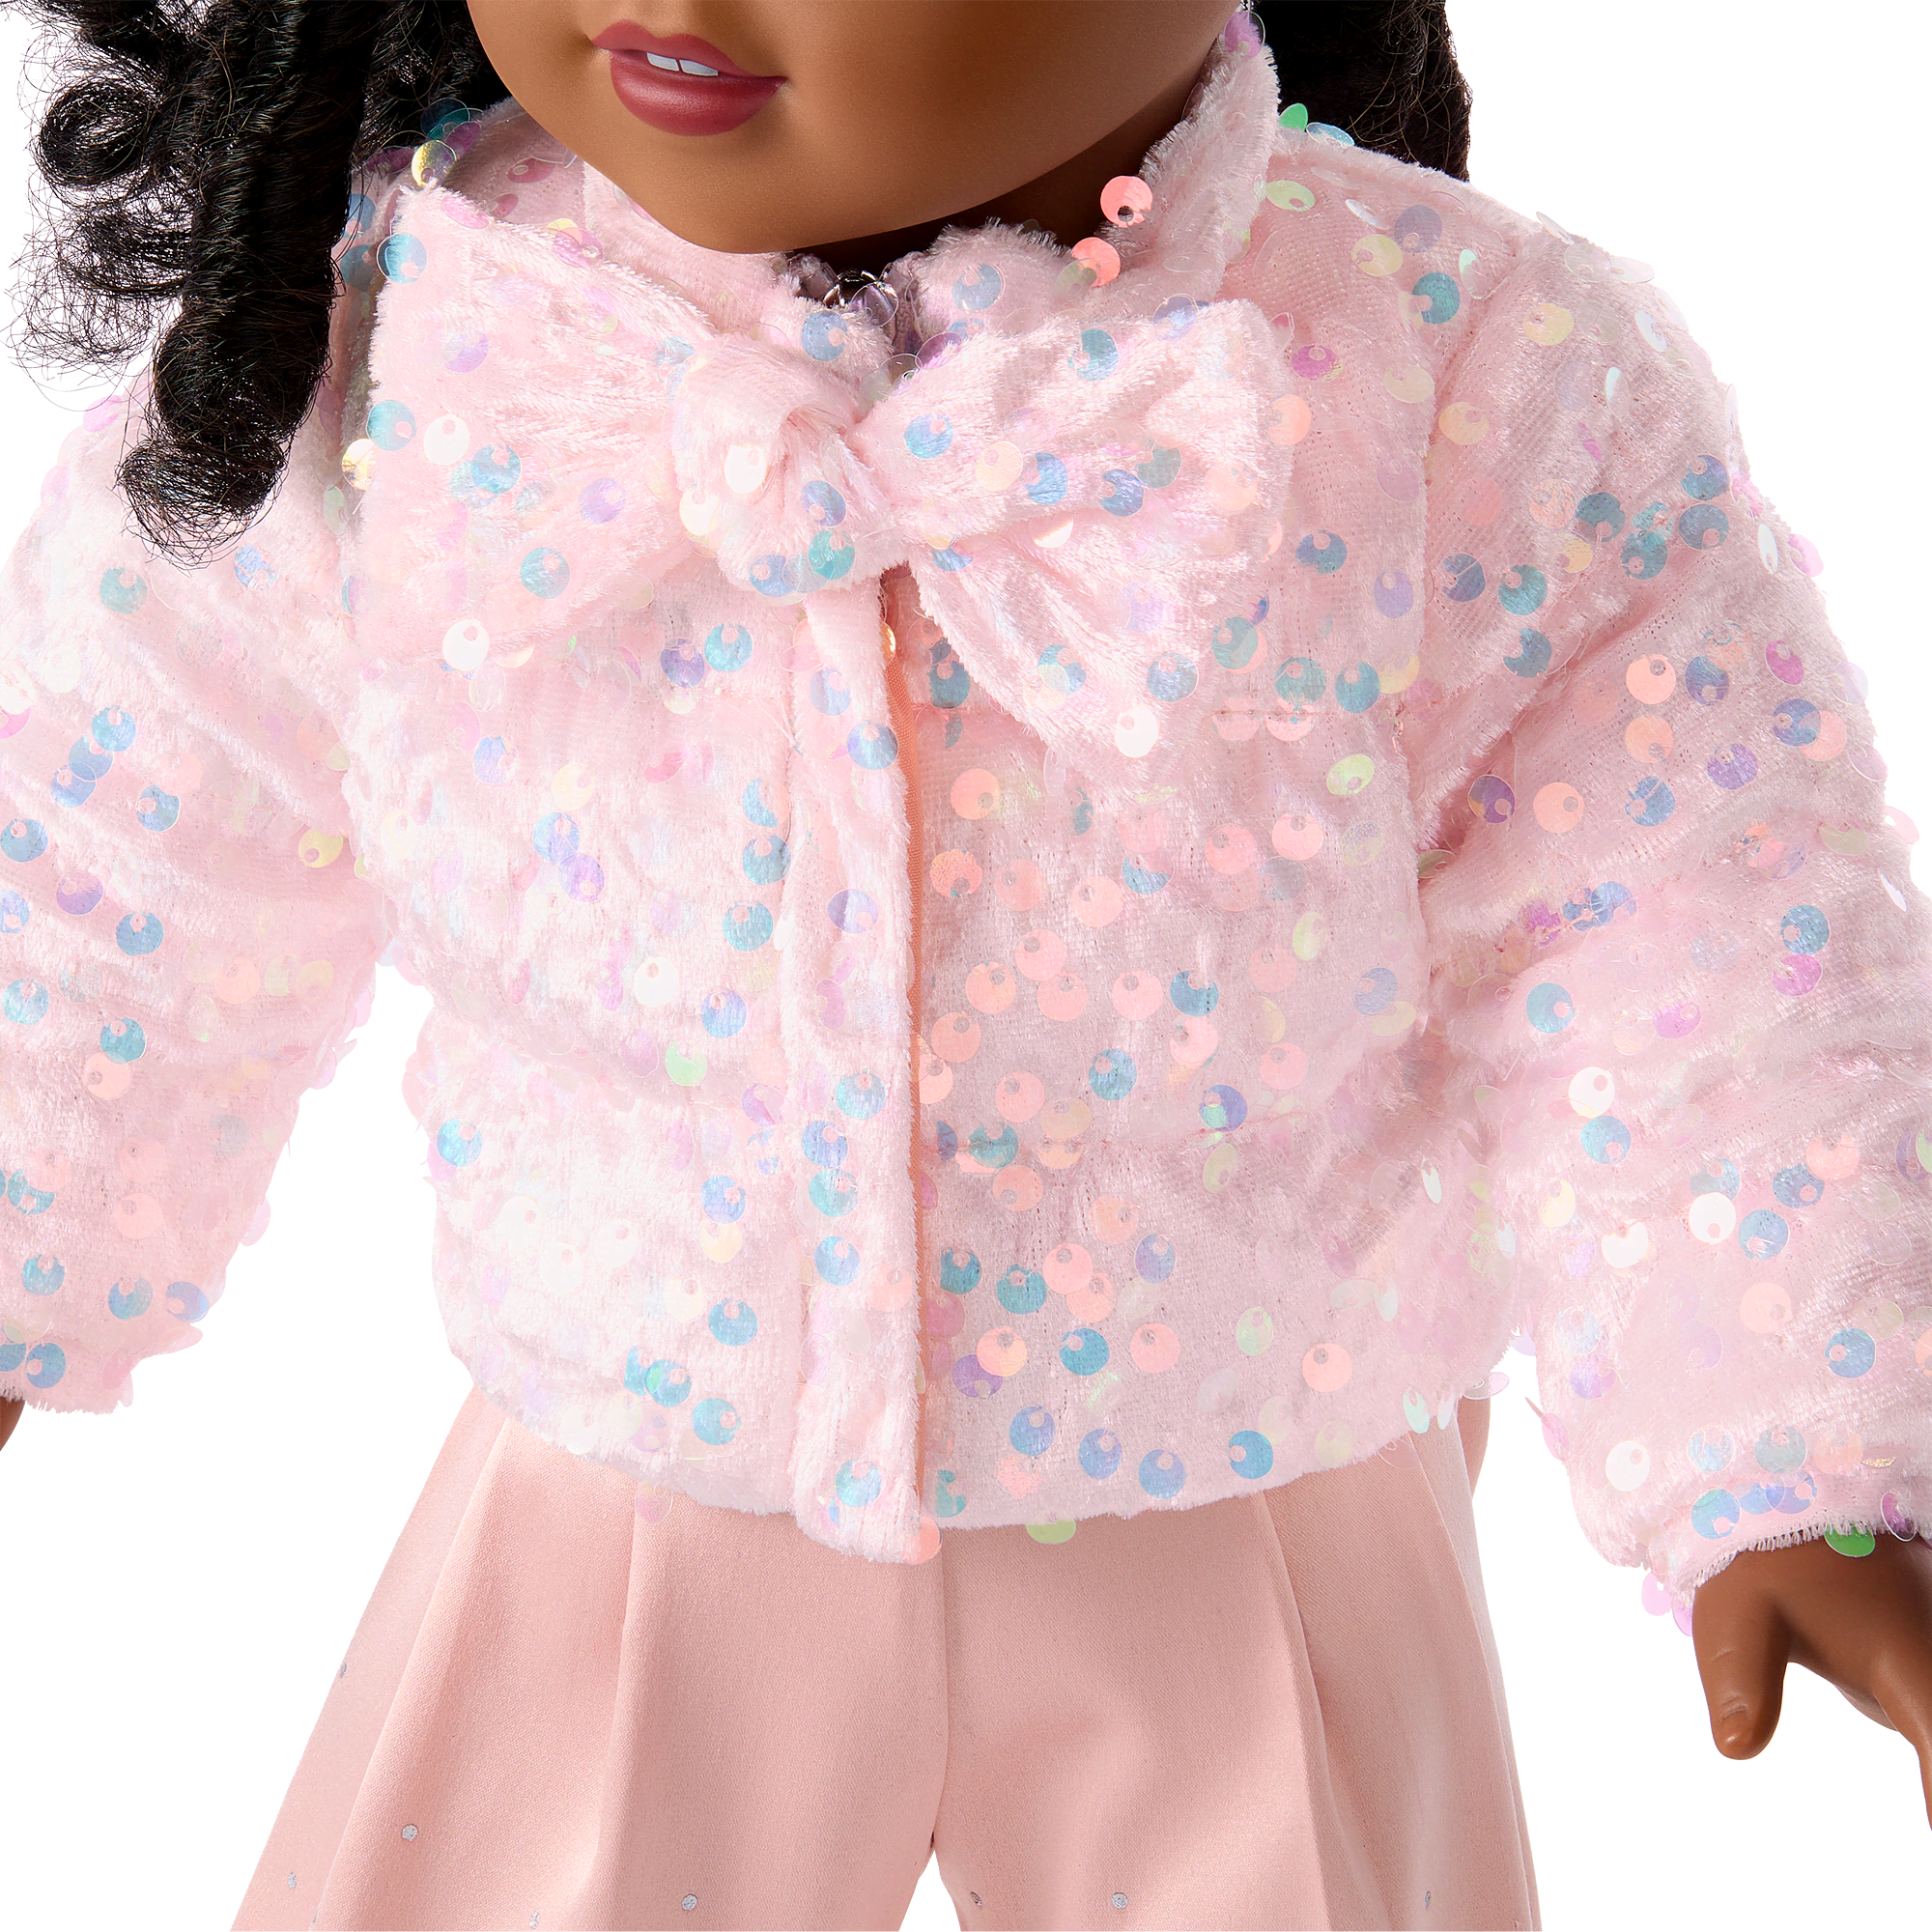 American Girl® x Something Navy Topped with a Bow Puffer Coat for 18-inch Dolls